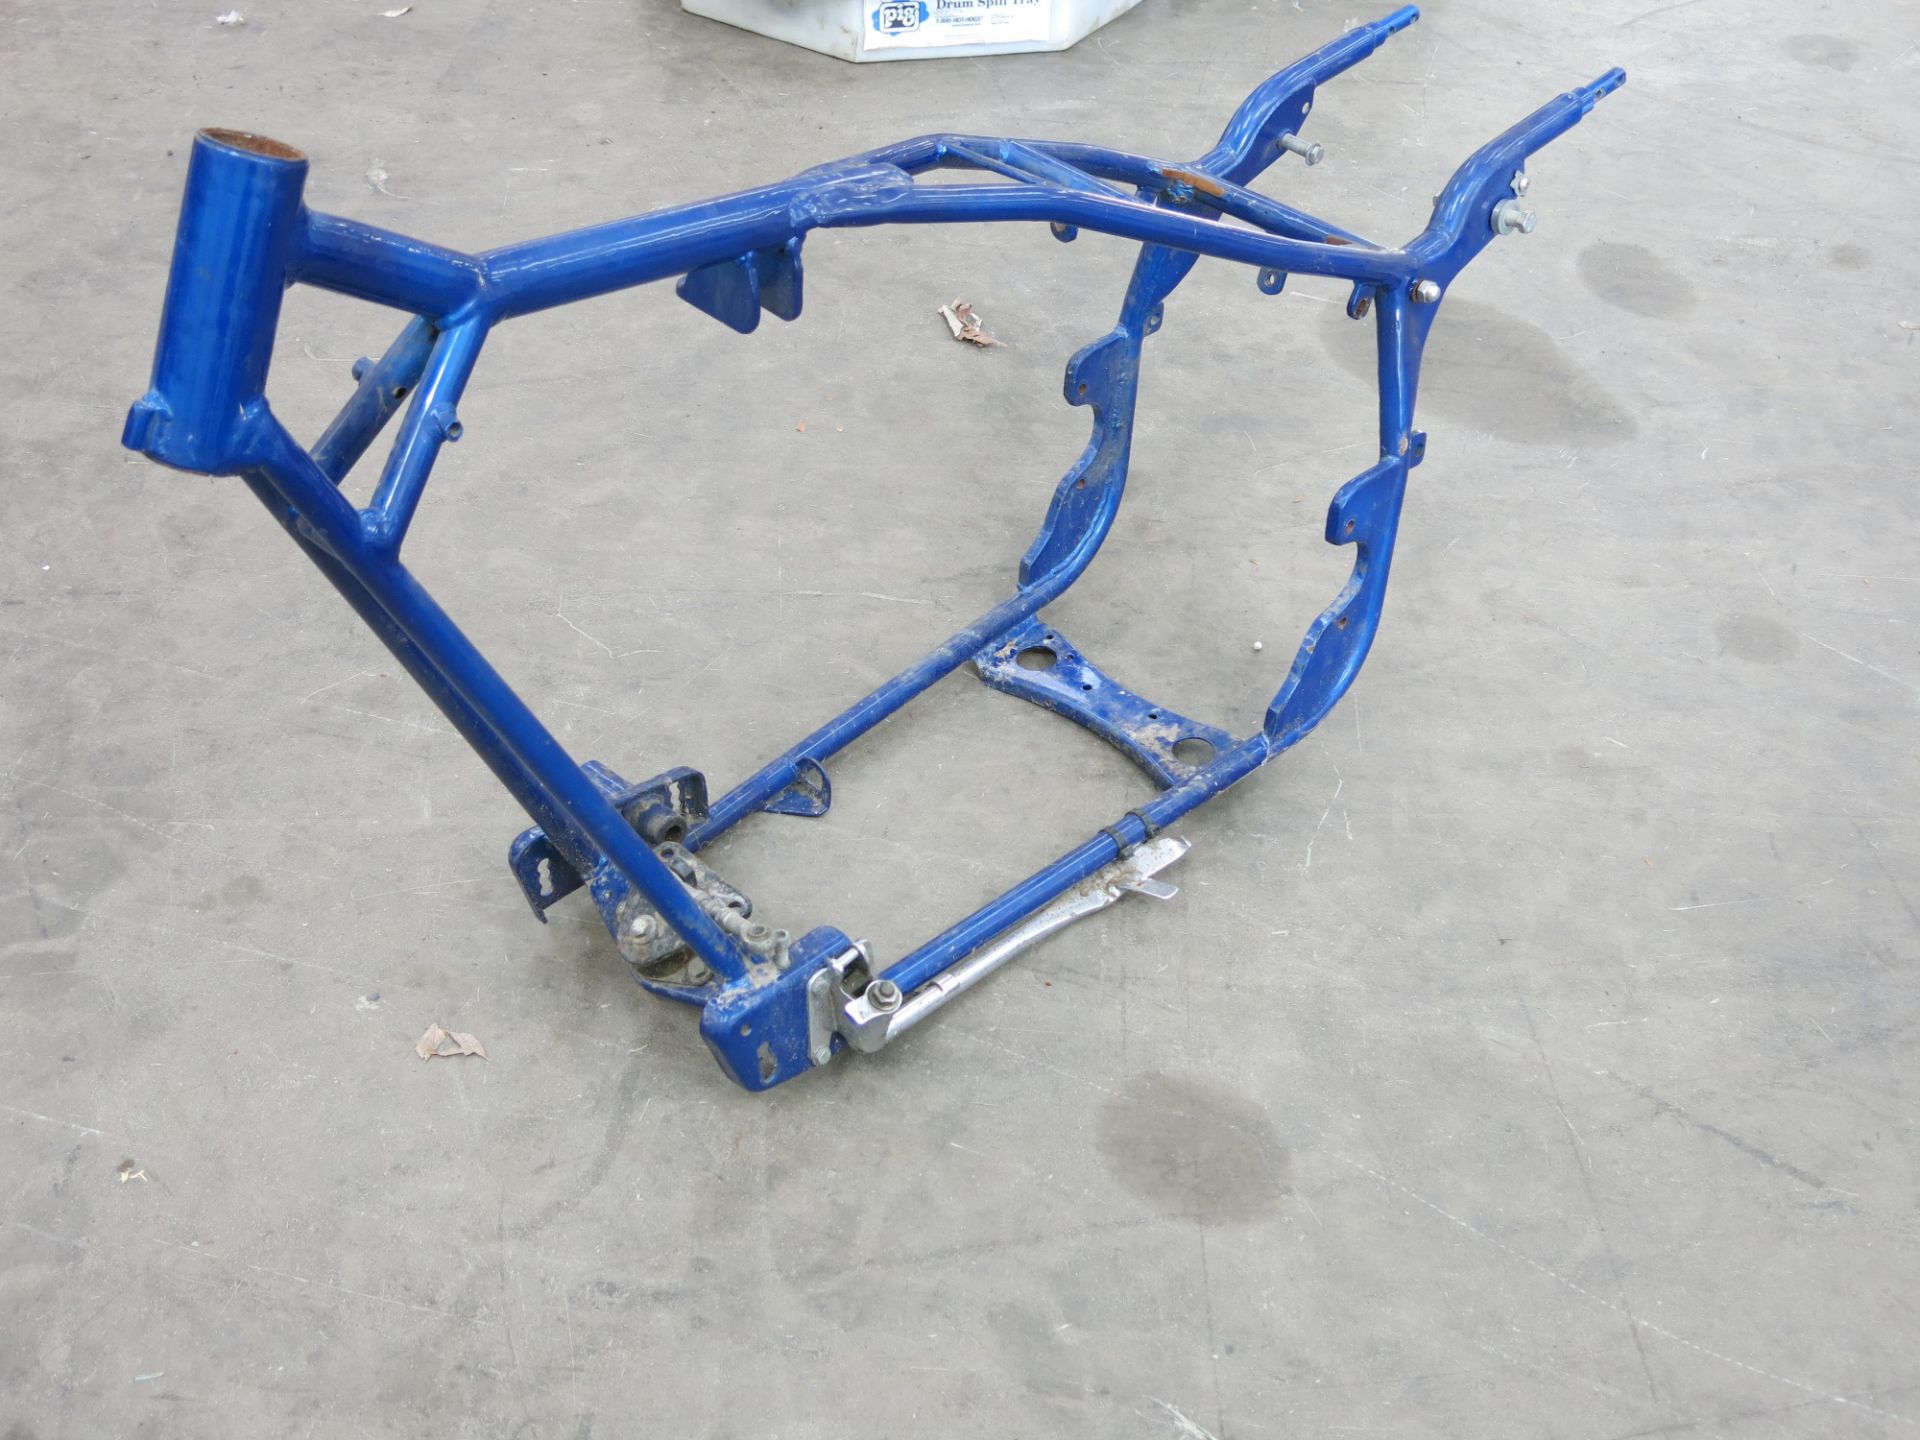 A Harley Davidson (?) motorbike frame. With modifications. No markings or serial number